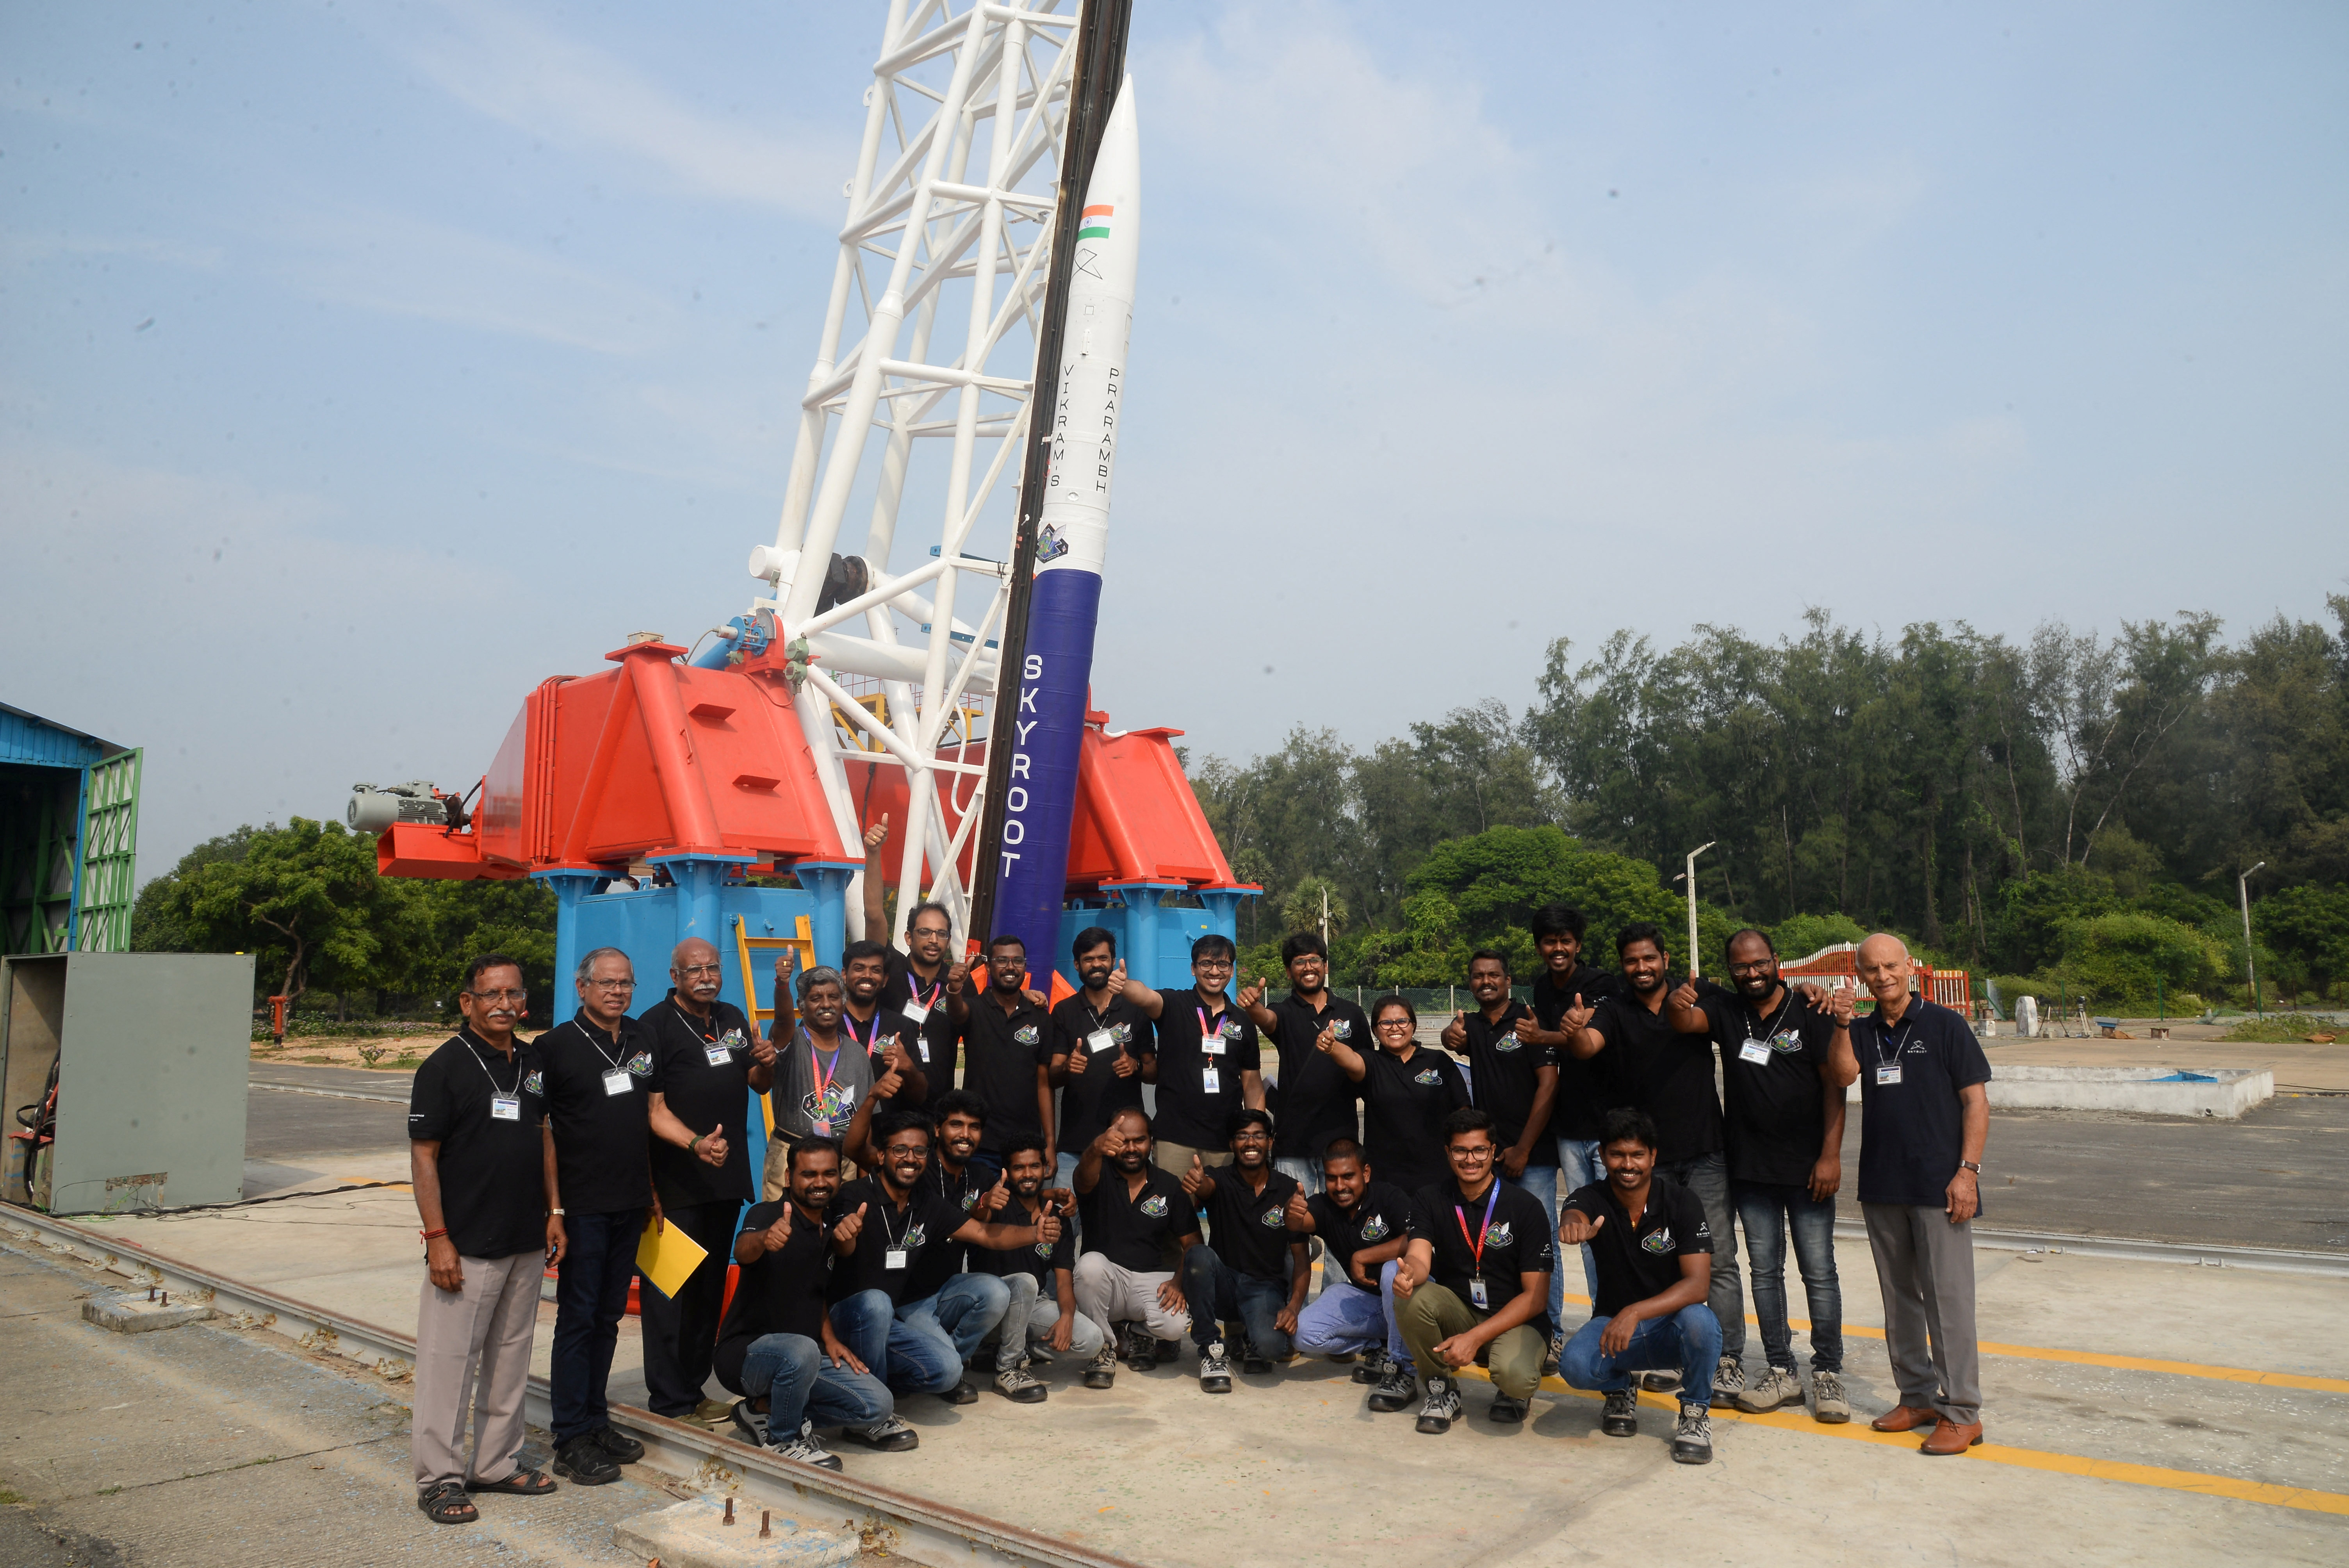 Employees pose in front of Vikram-S rocket at a spaceport in Sriharikota